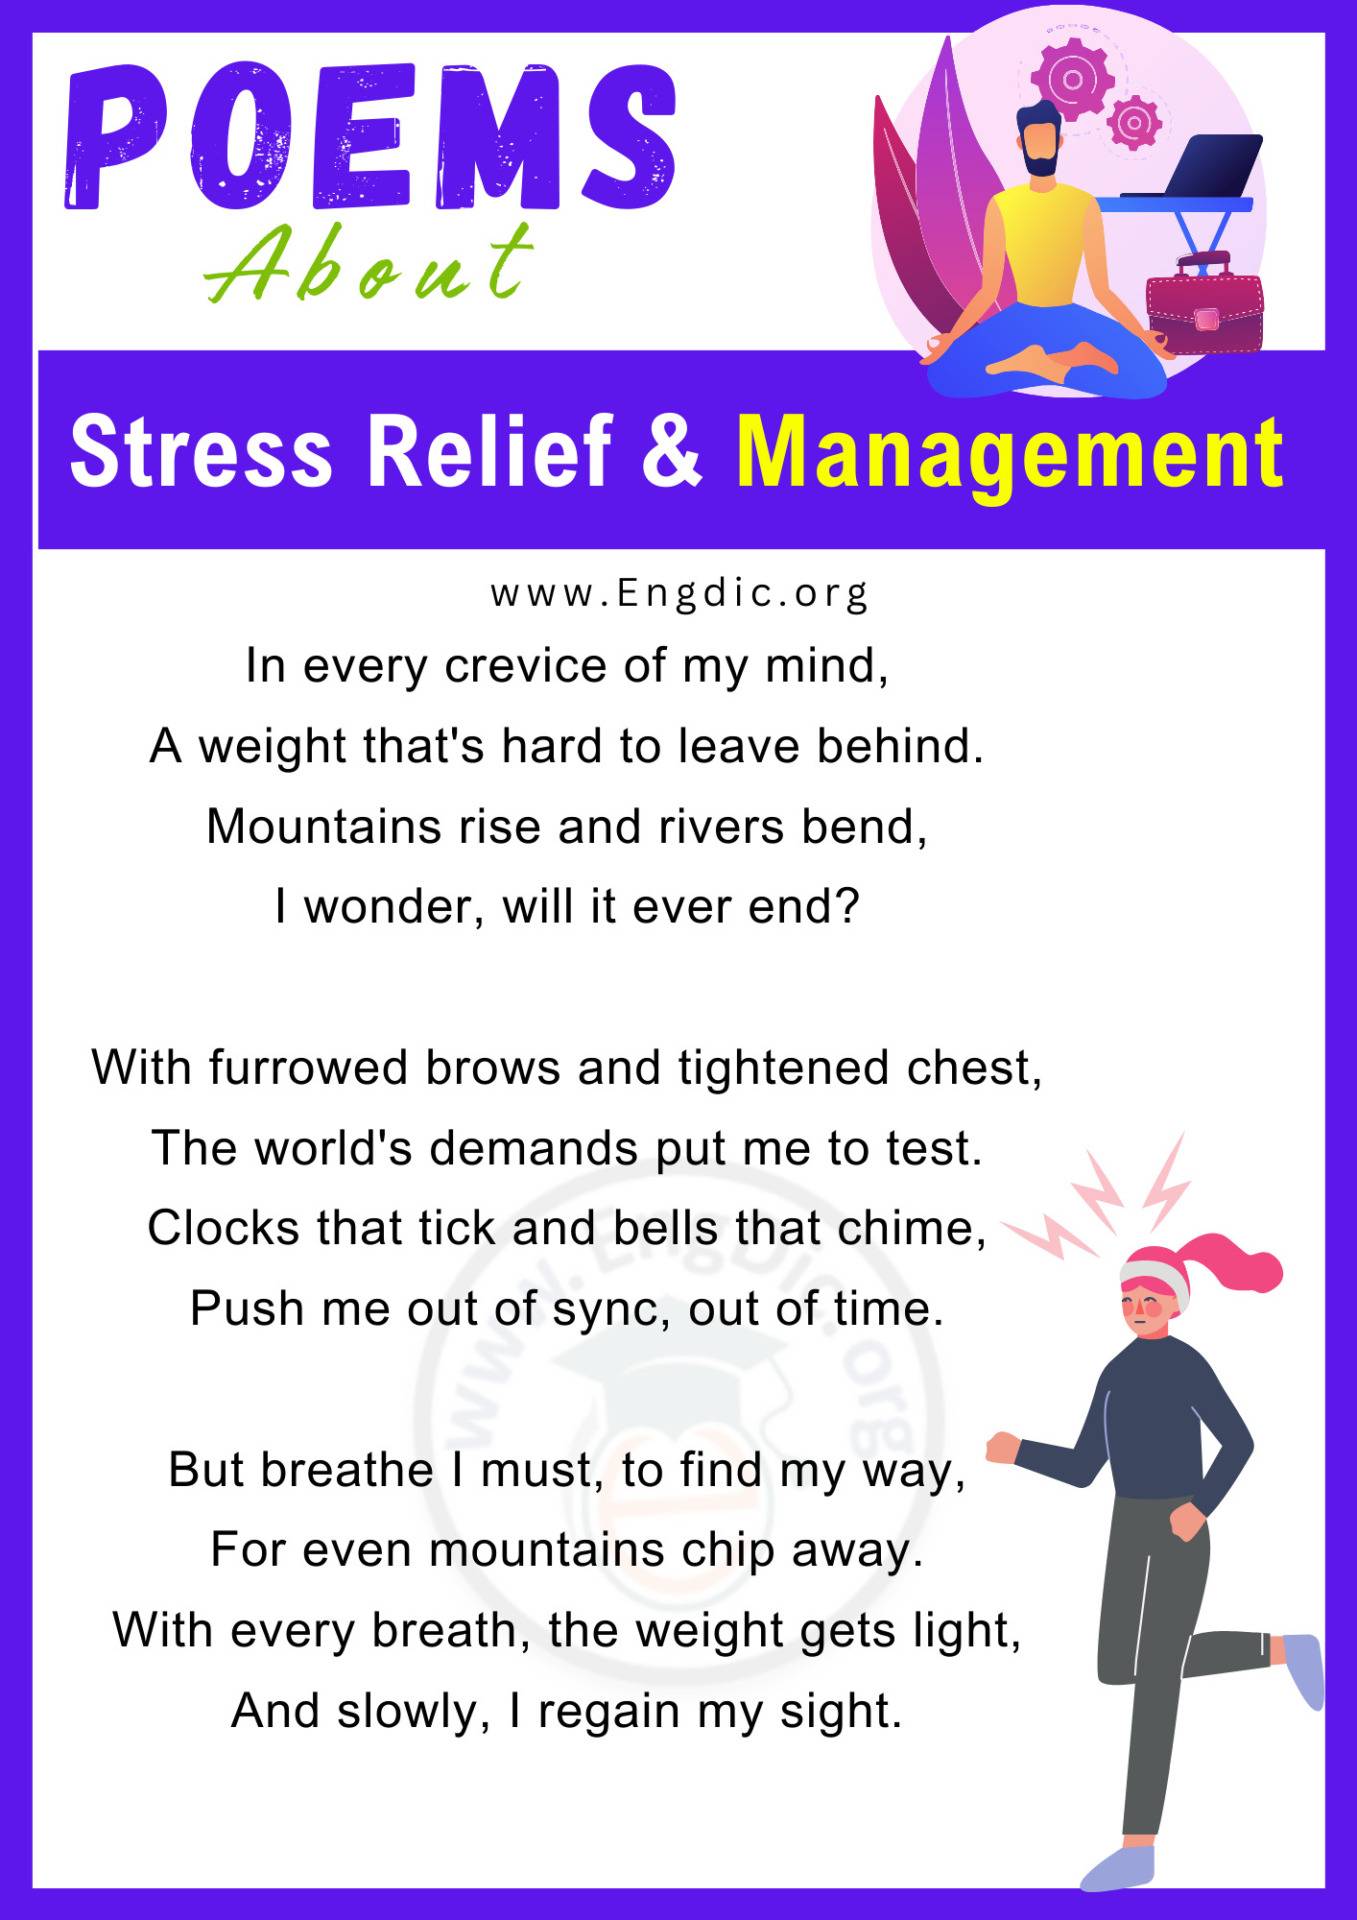 Poems for Stress Relief & Management